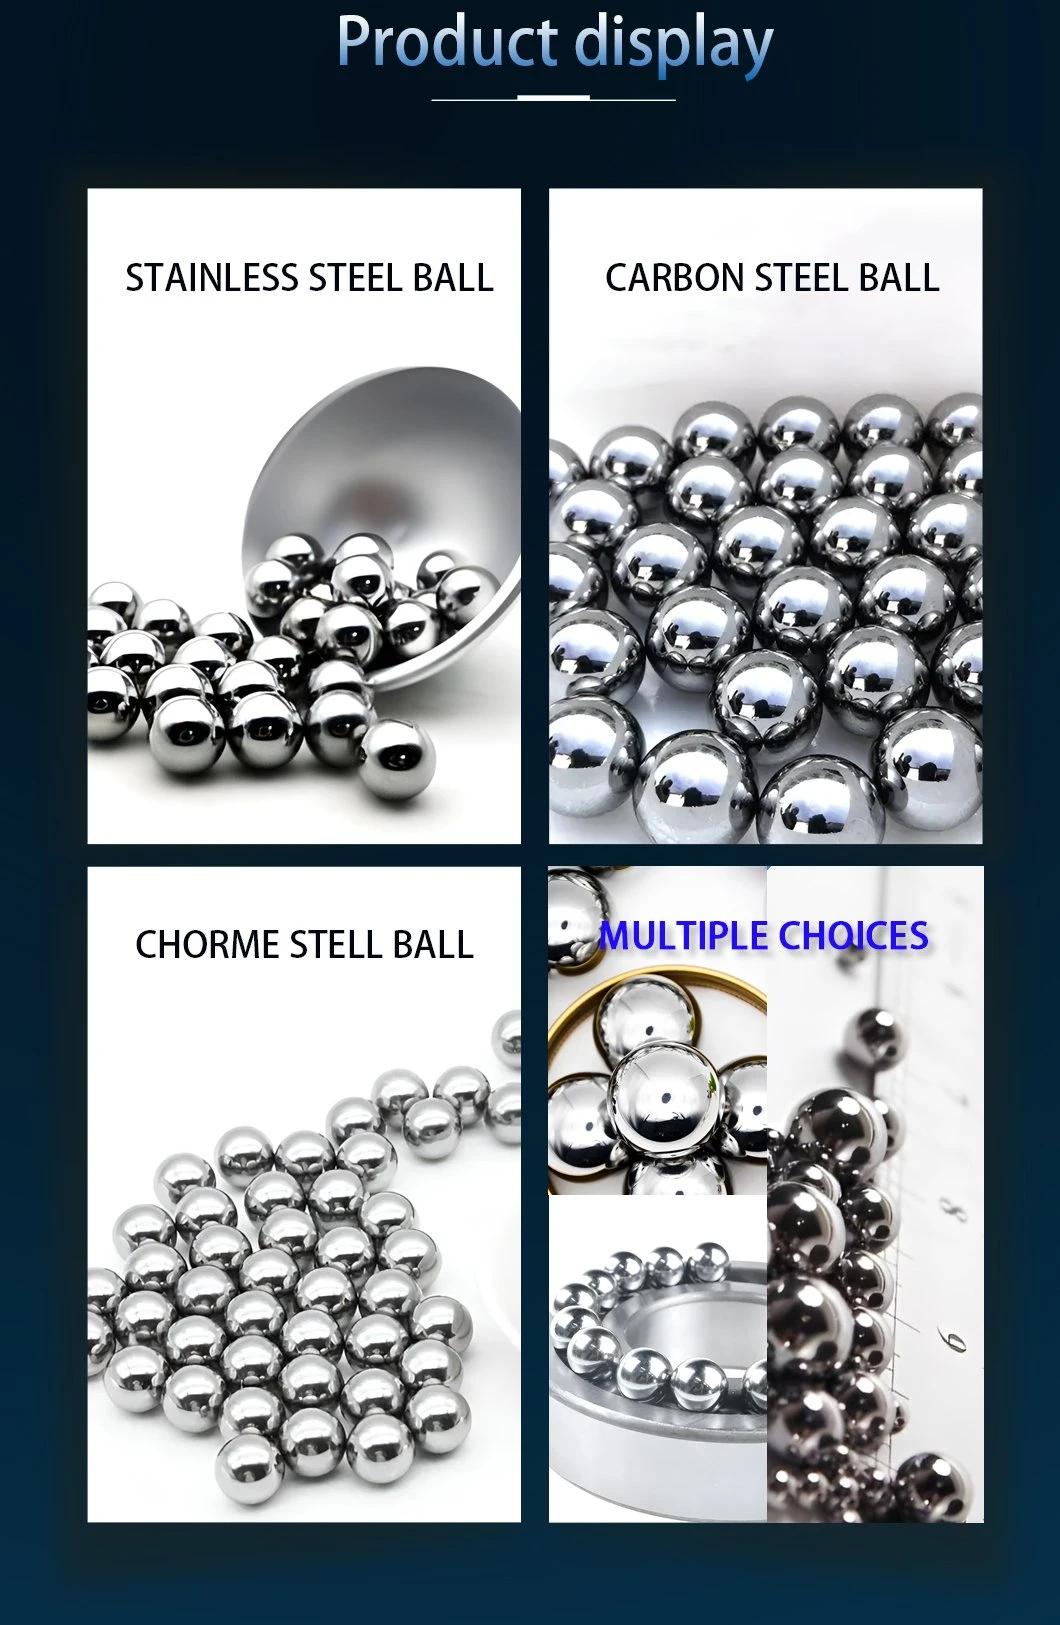 Ready to Ship Small Stainless Metal Ball 1.5mm AISI 304 Stainless Steel Ball